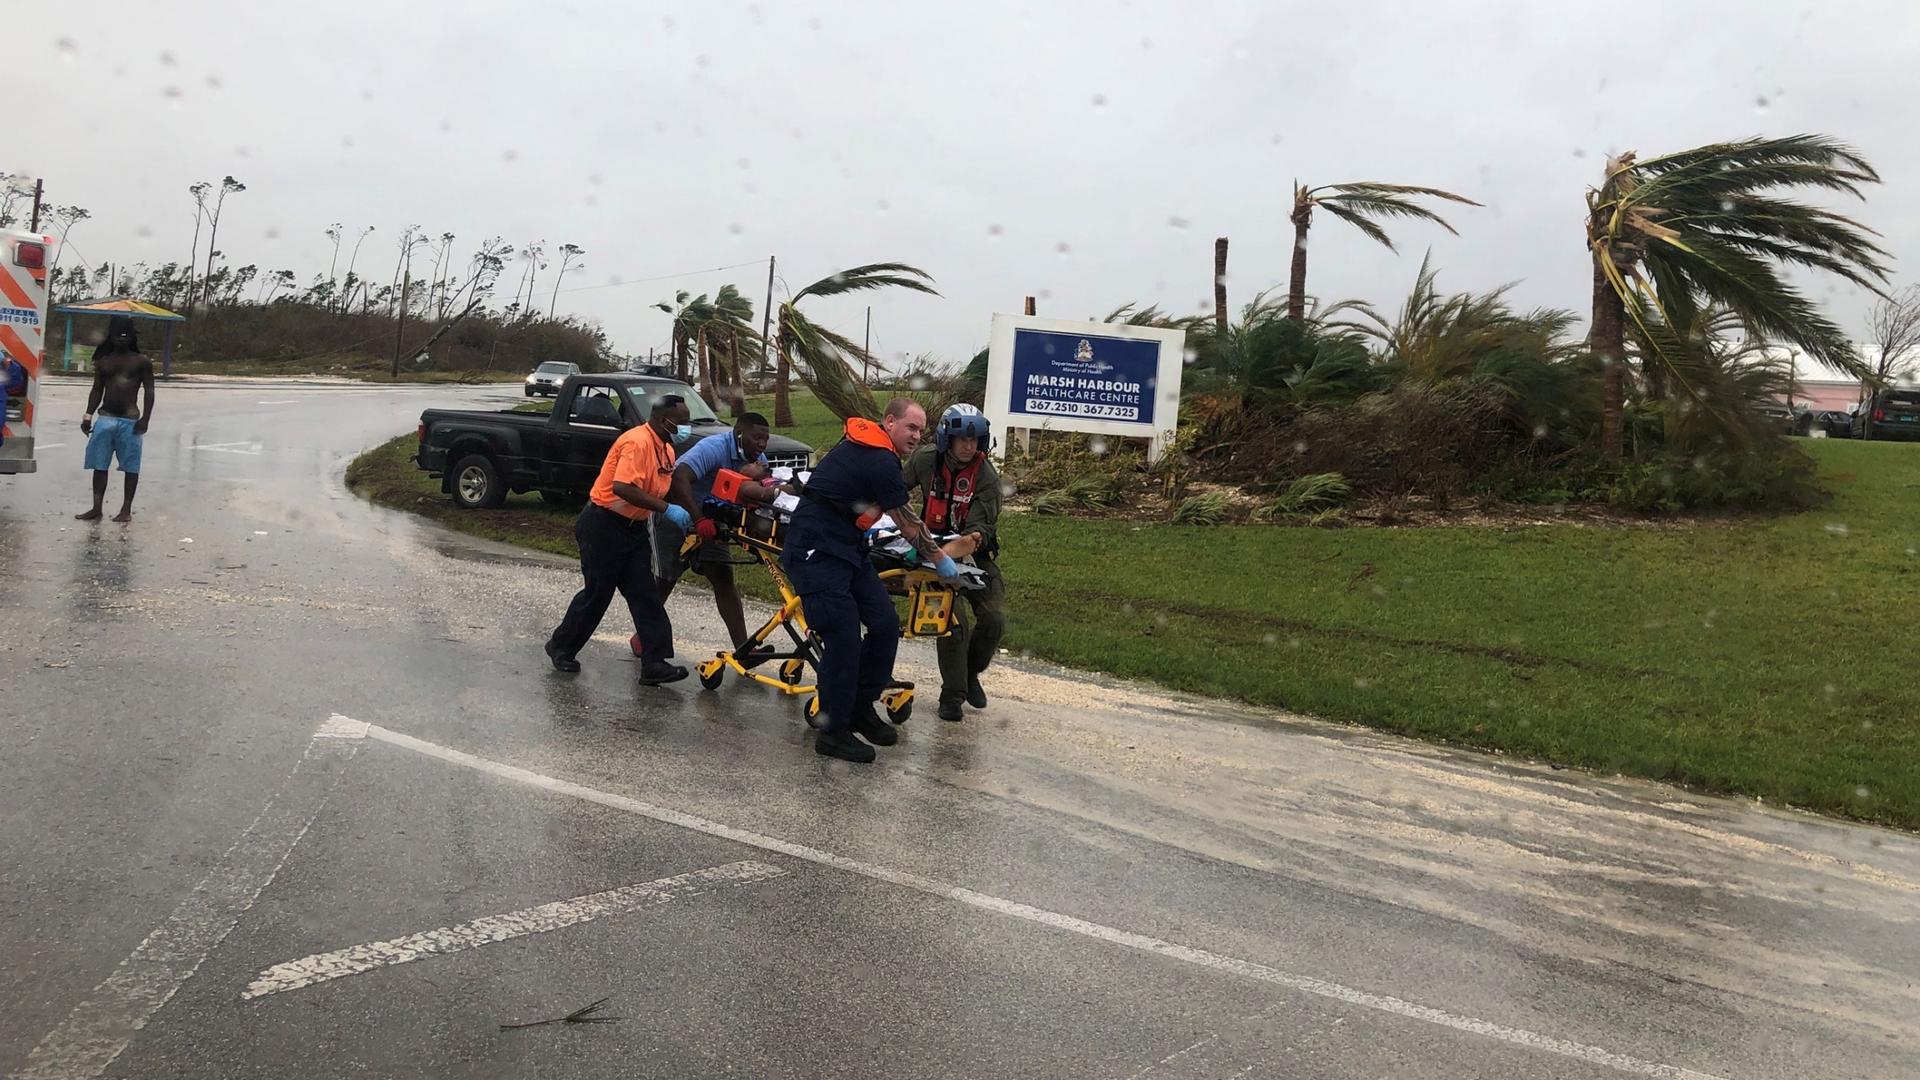 Four people run through a deserted street while pushing a guerney that's holding a patient during Hurricane Dorian.